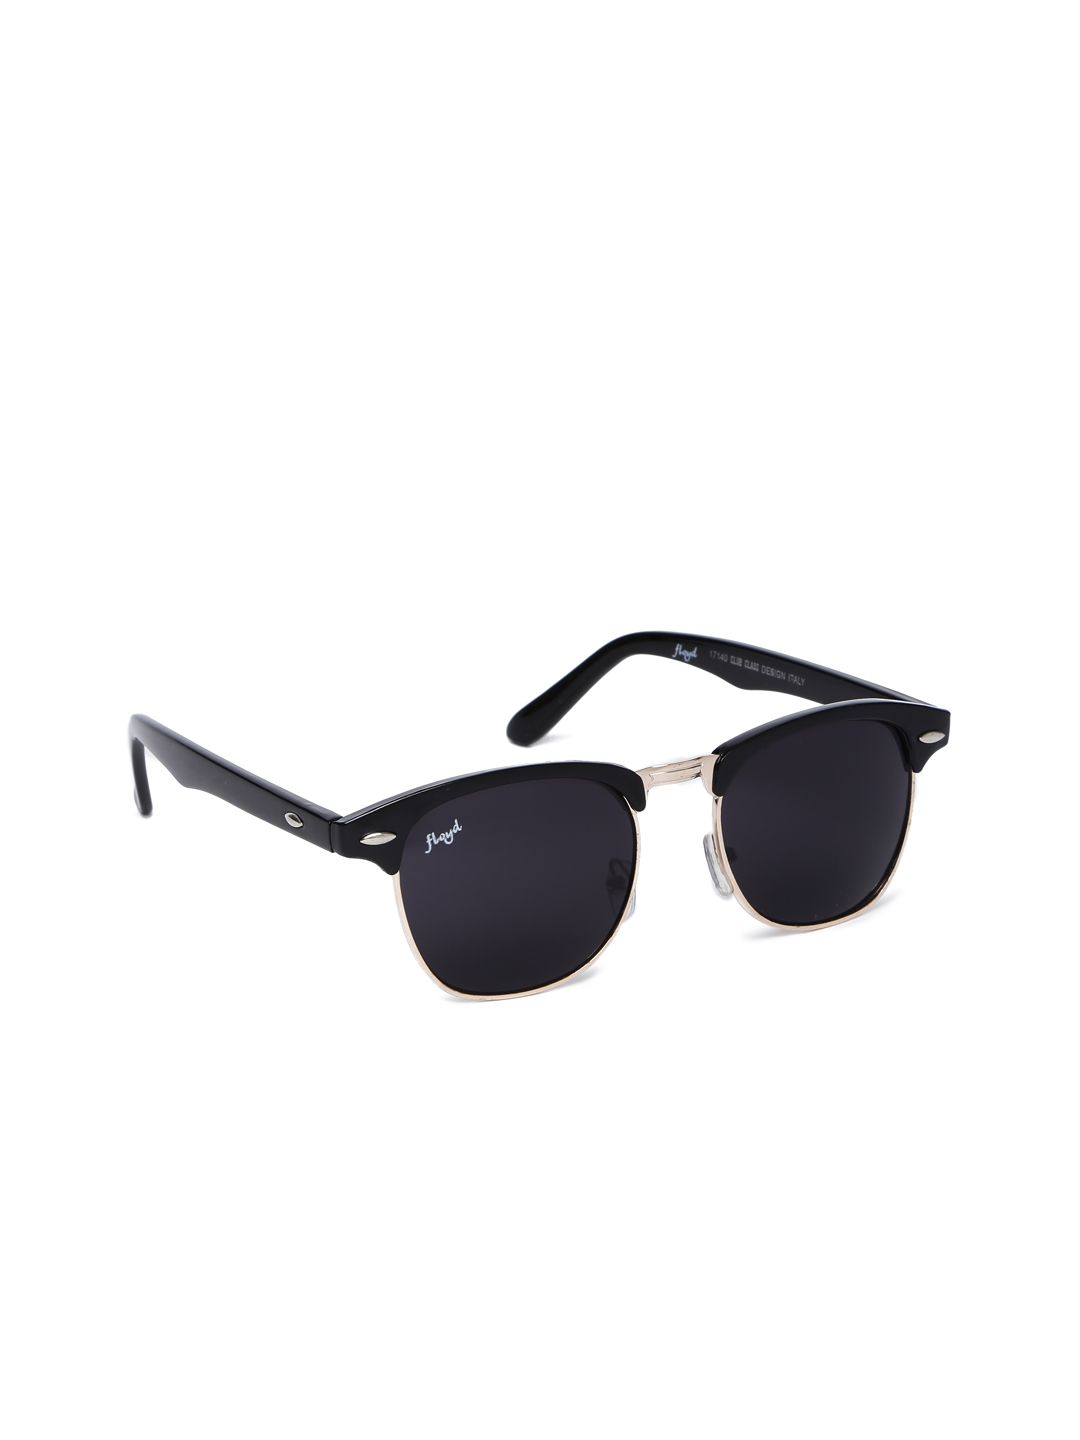 In style sunglasses summer 2019